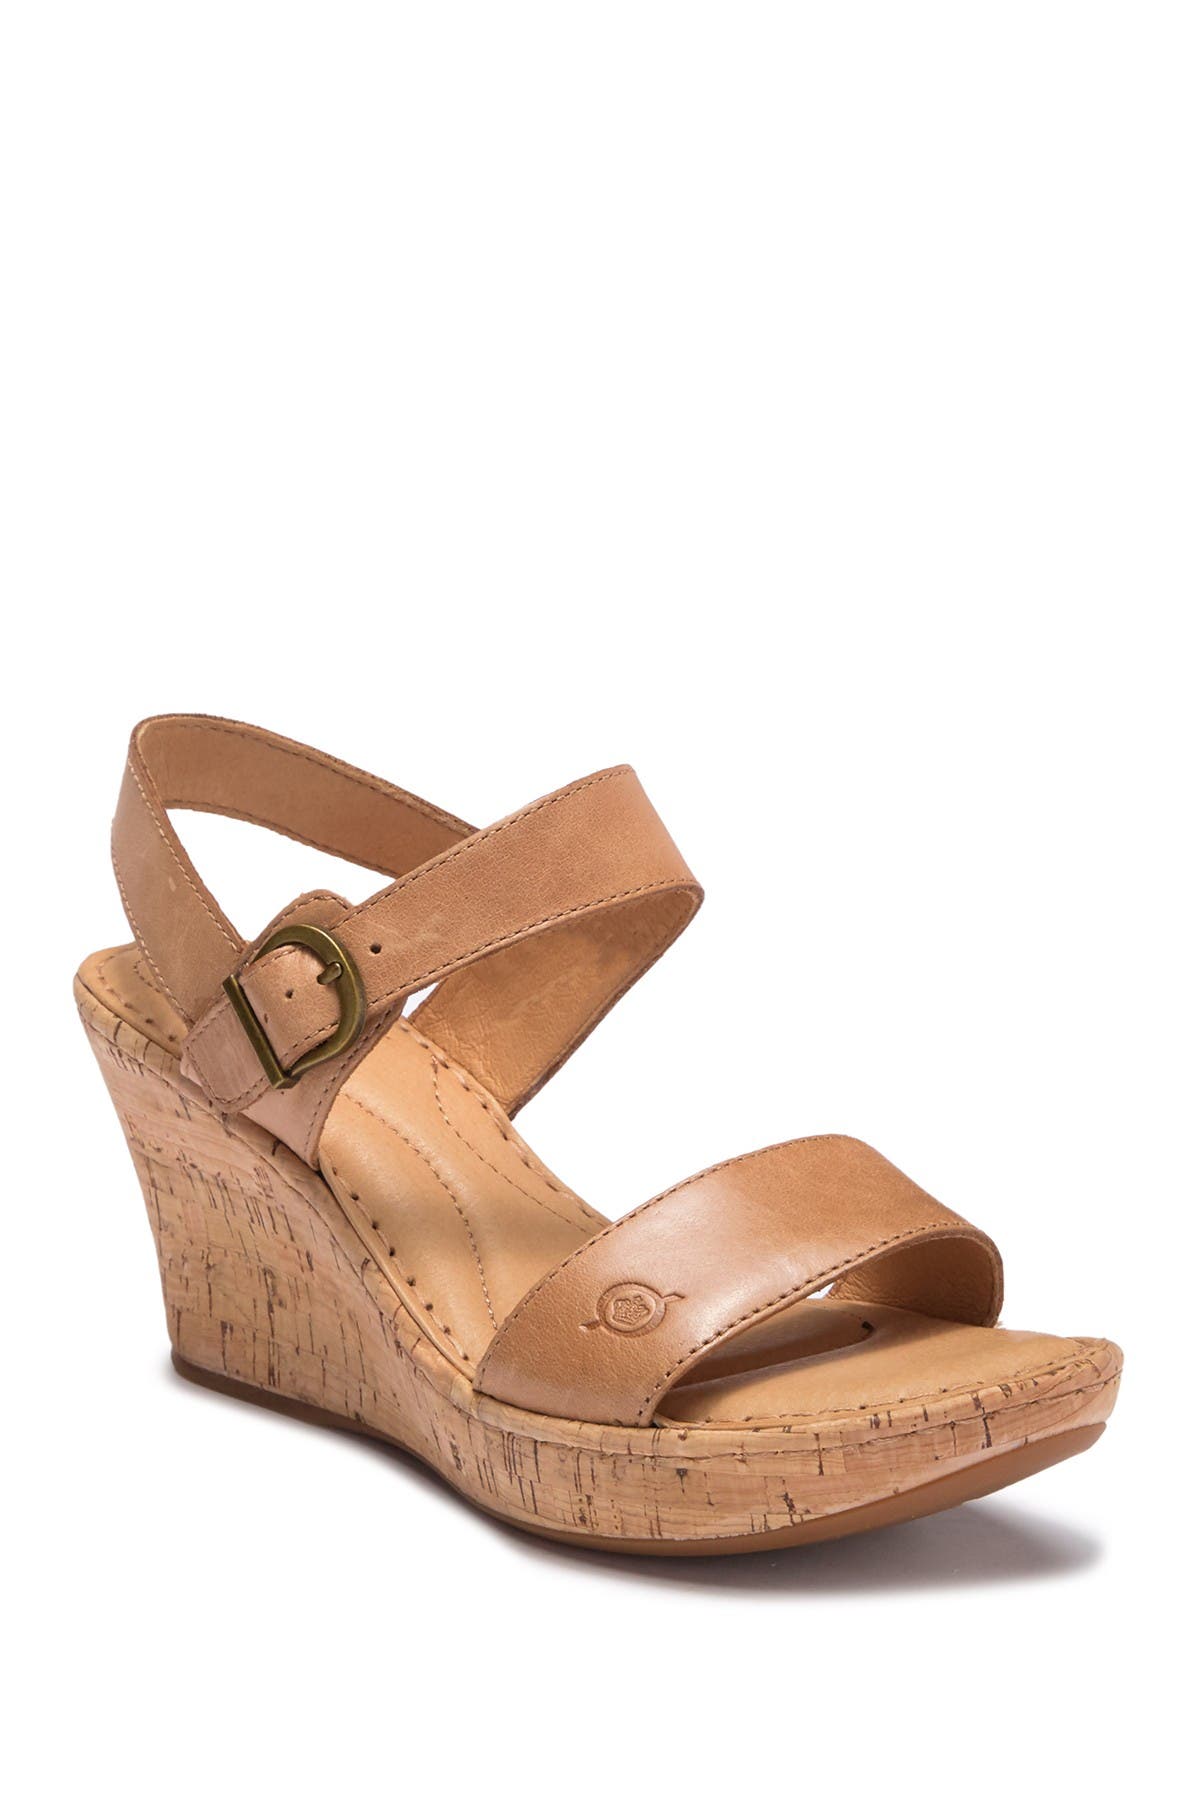 leather cork wedges